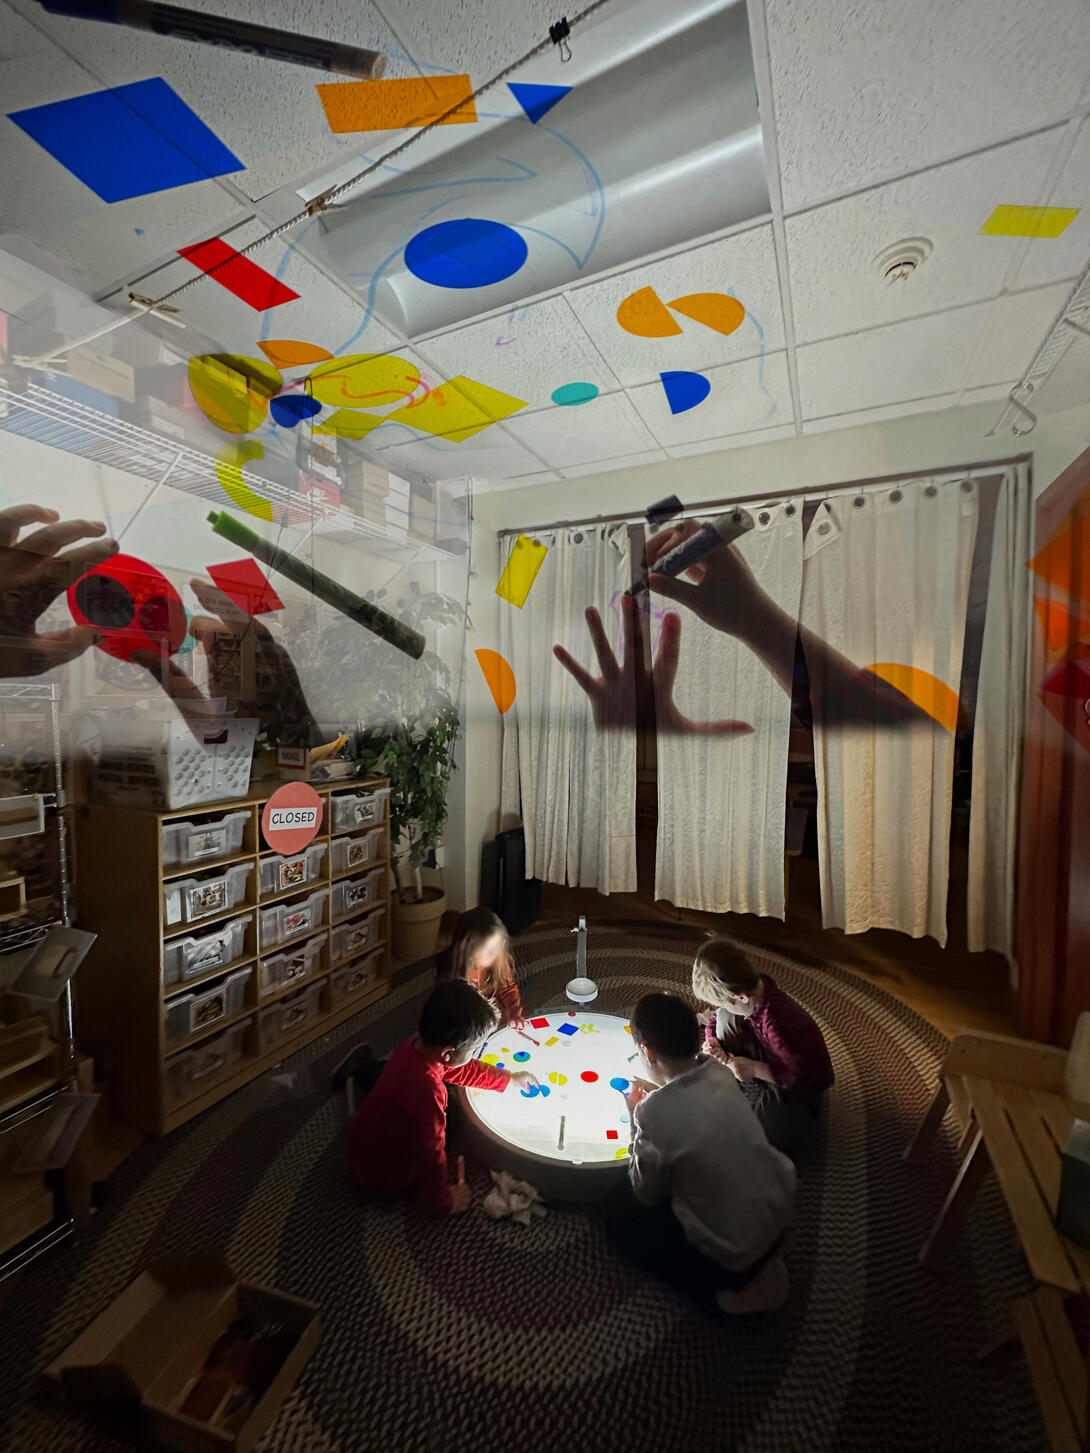 A room filled with an overhead projection